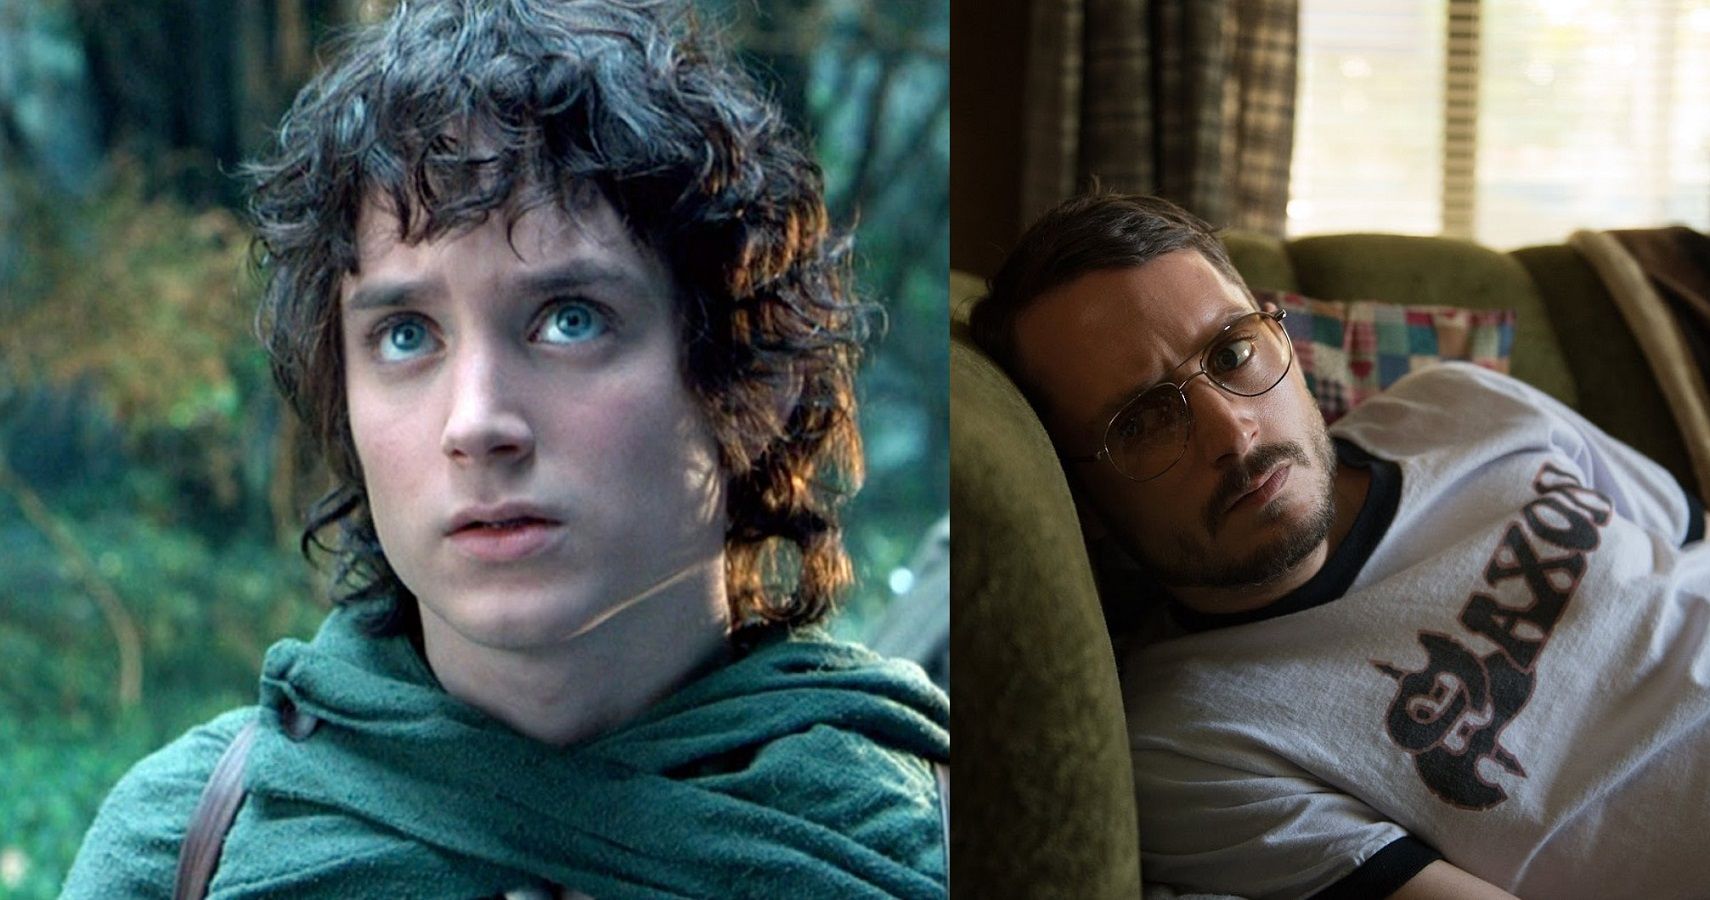 Elijah Wood's 10 Best Movies, According to Rotten Tomatoes